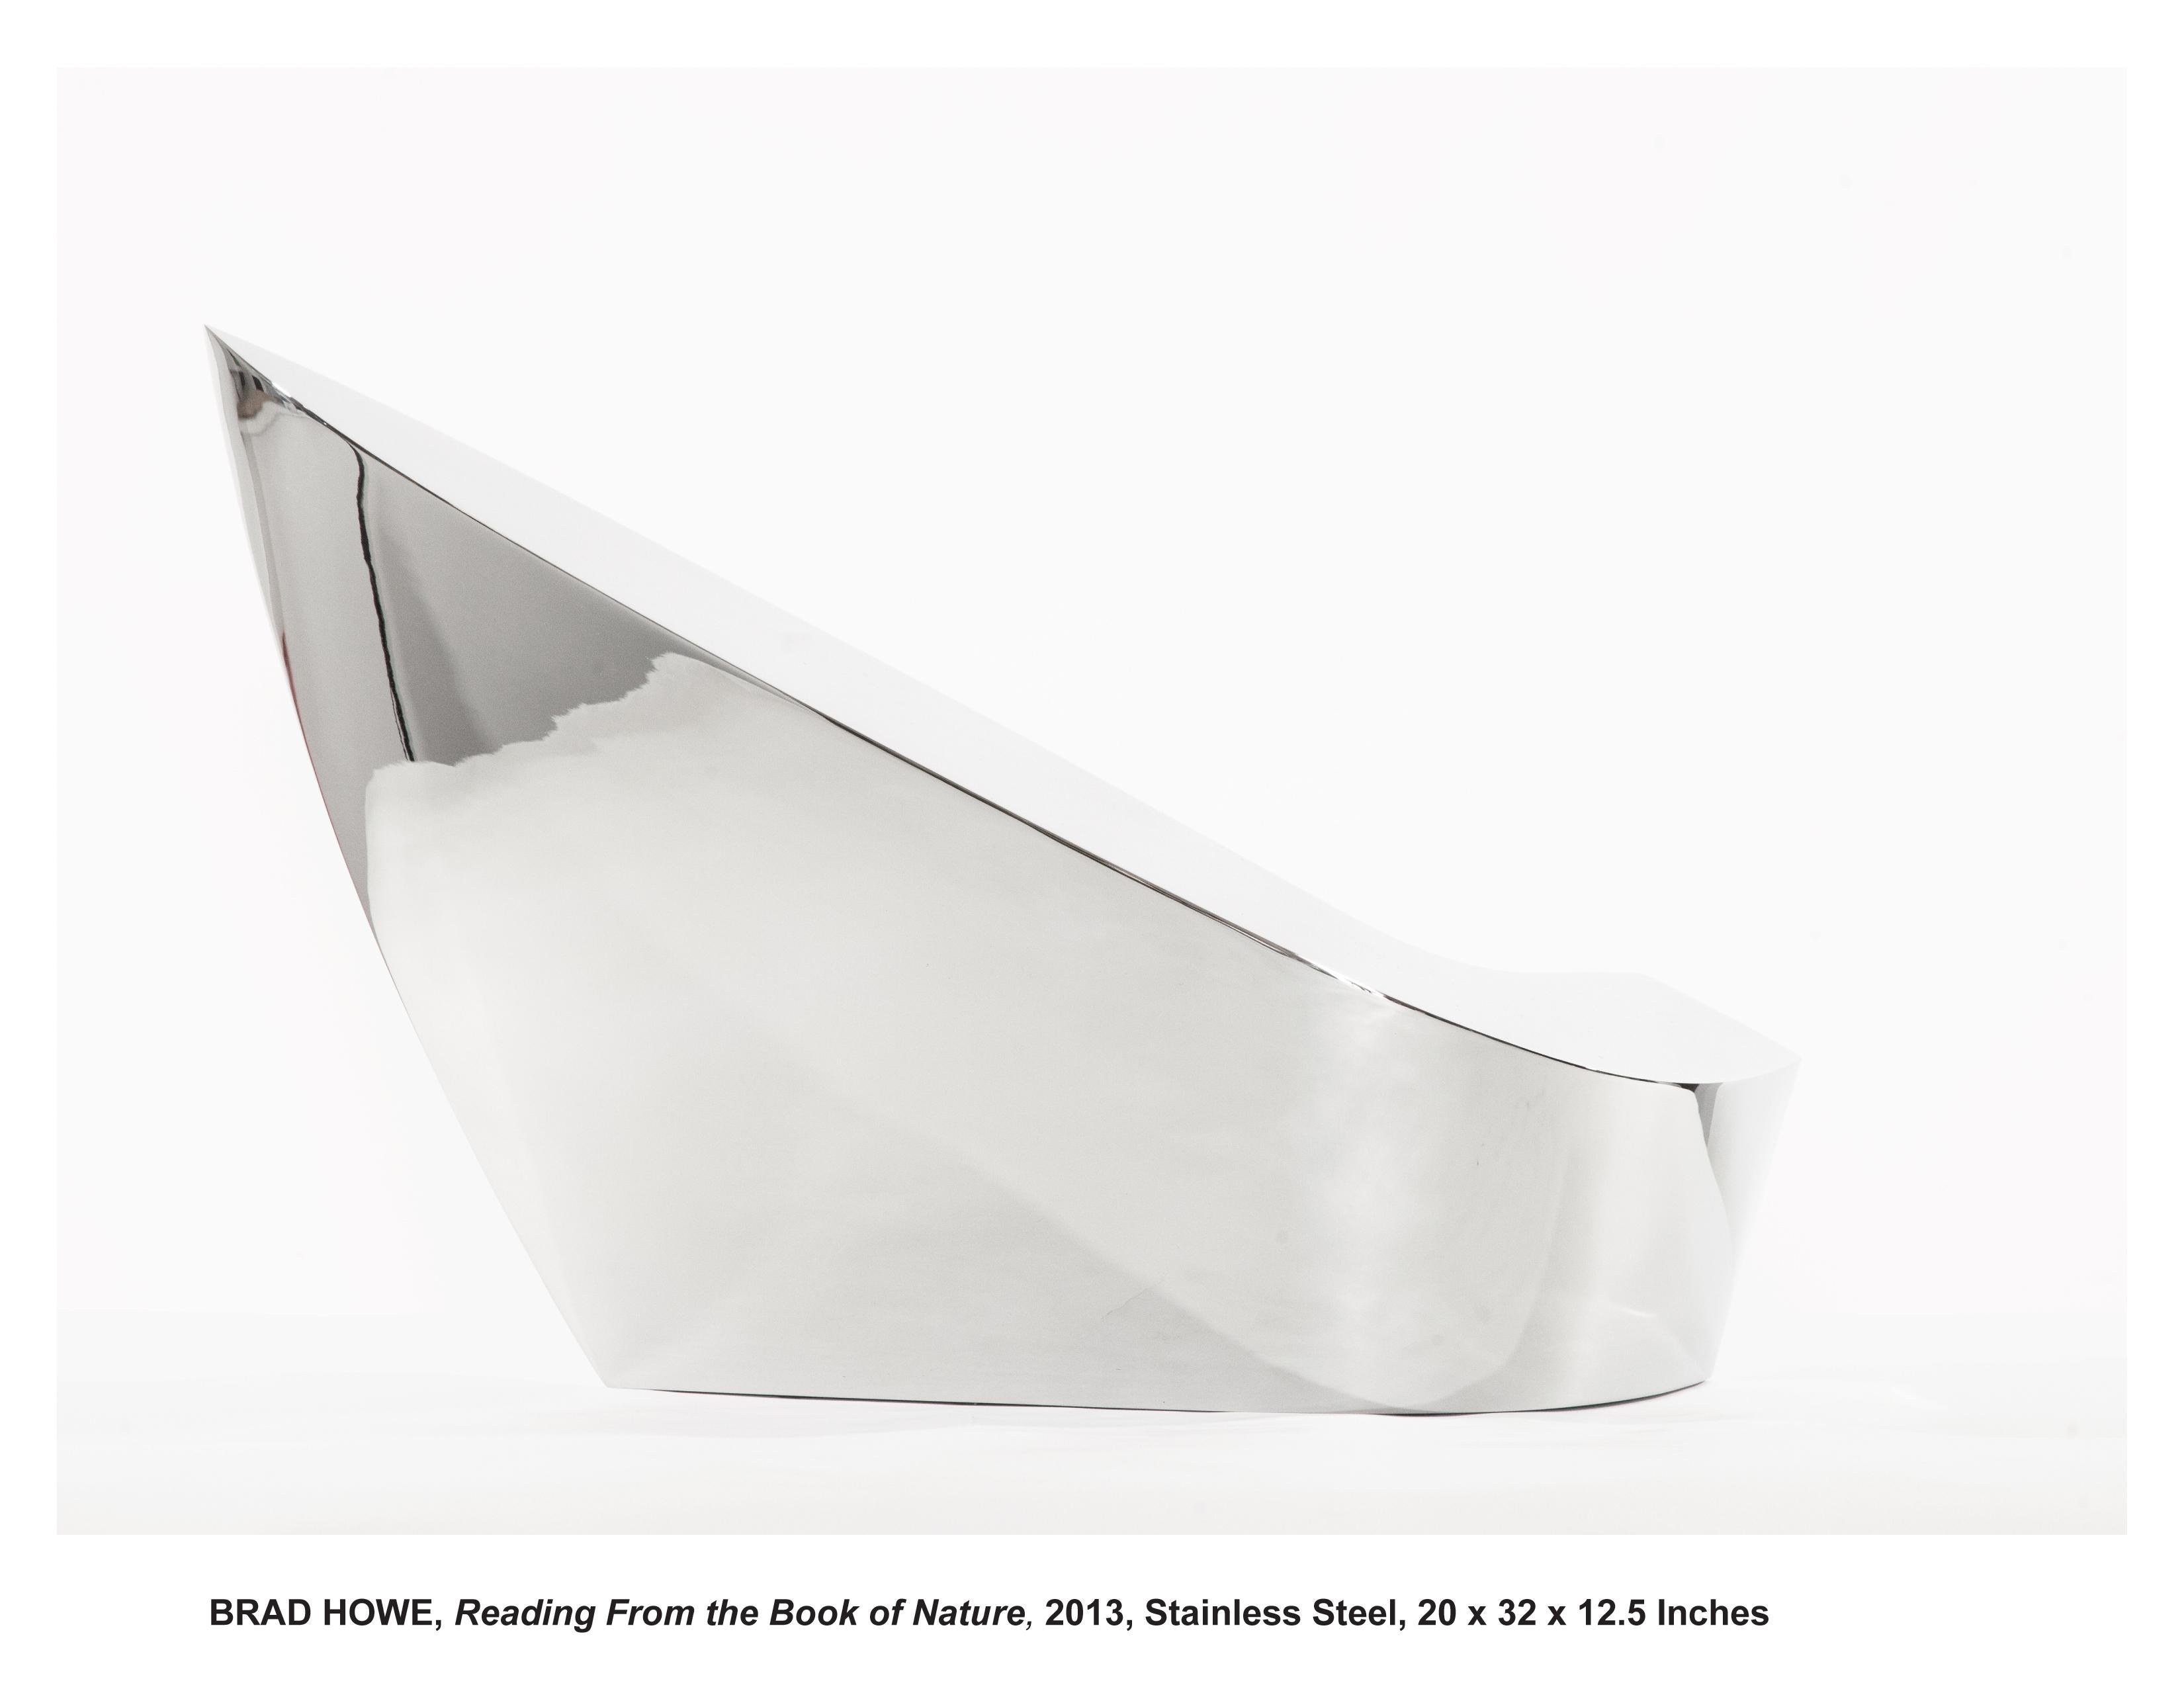 Abstract High Polished Stainless Steel Contemporary Sculpture Reading From The..